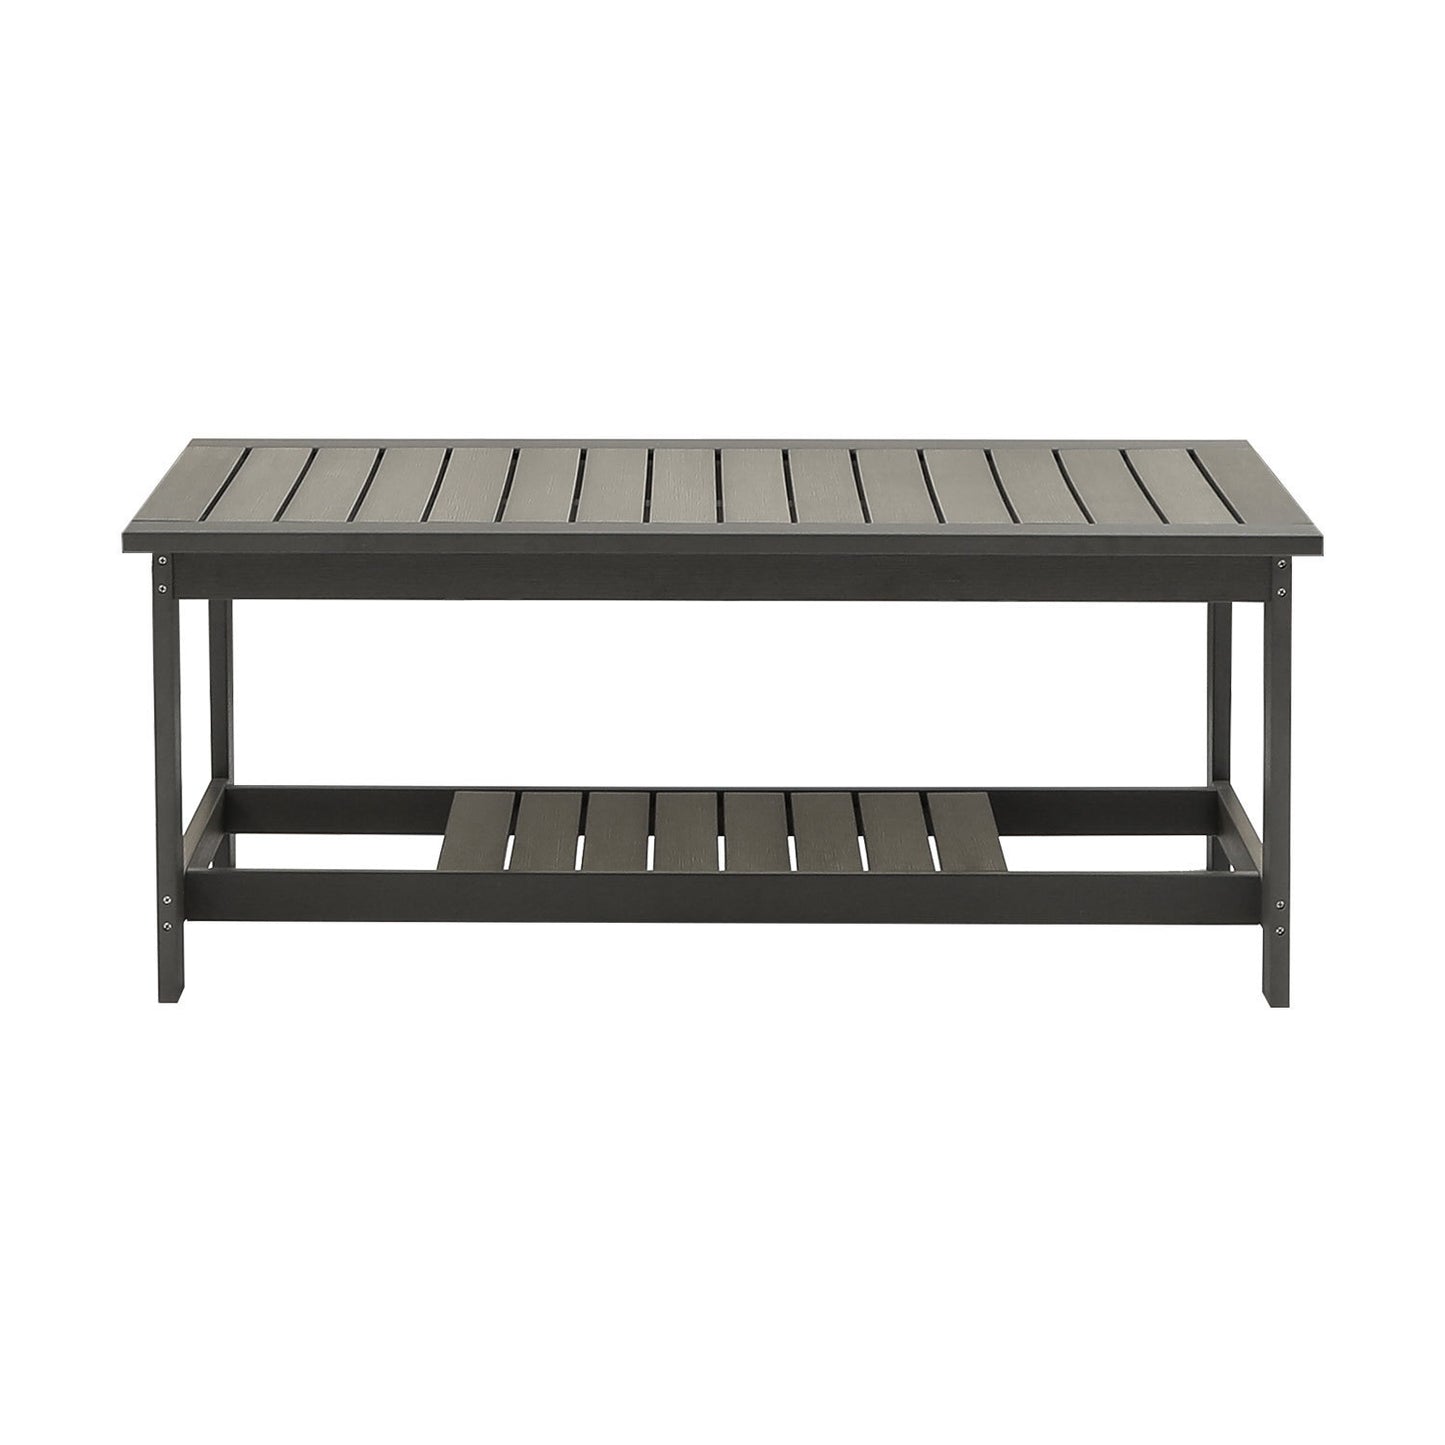 Durable Grey Outdoor Coffee Table for All Seasons